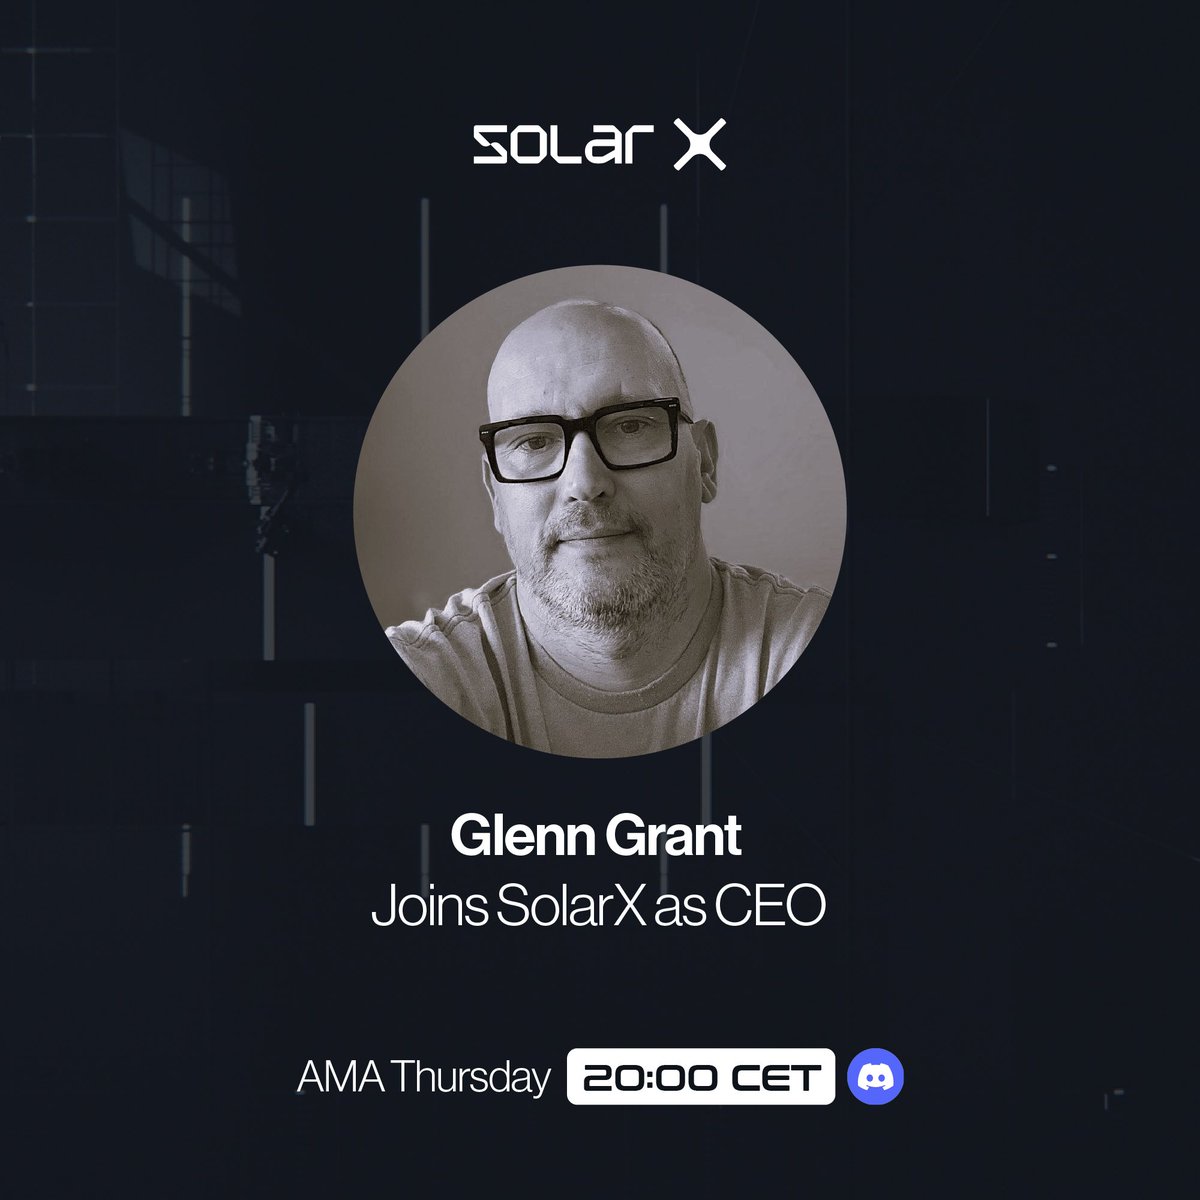 We are happy to announce that Glenn Grant has joined SolarX as our new CEO! Previous positions include director of Kraken, Saxo Bank, Rosenthal Collins New York, Minima. Co-founder of Sheer Markets.. Join us for his first AMA on Discord this Thursday: discord.com/invite/solarxc…